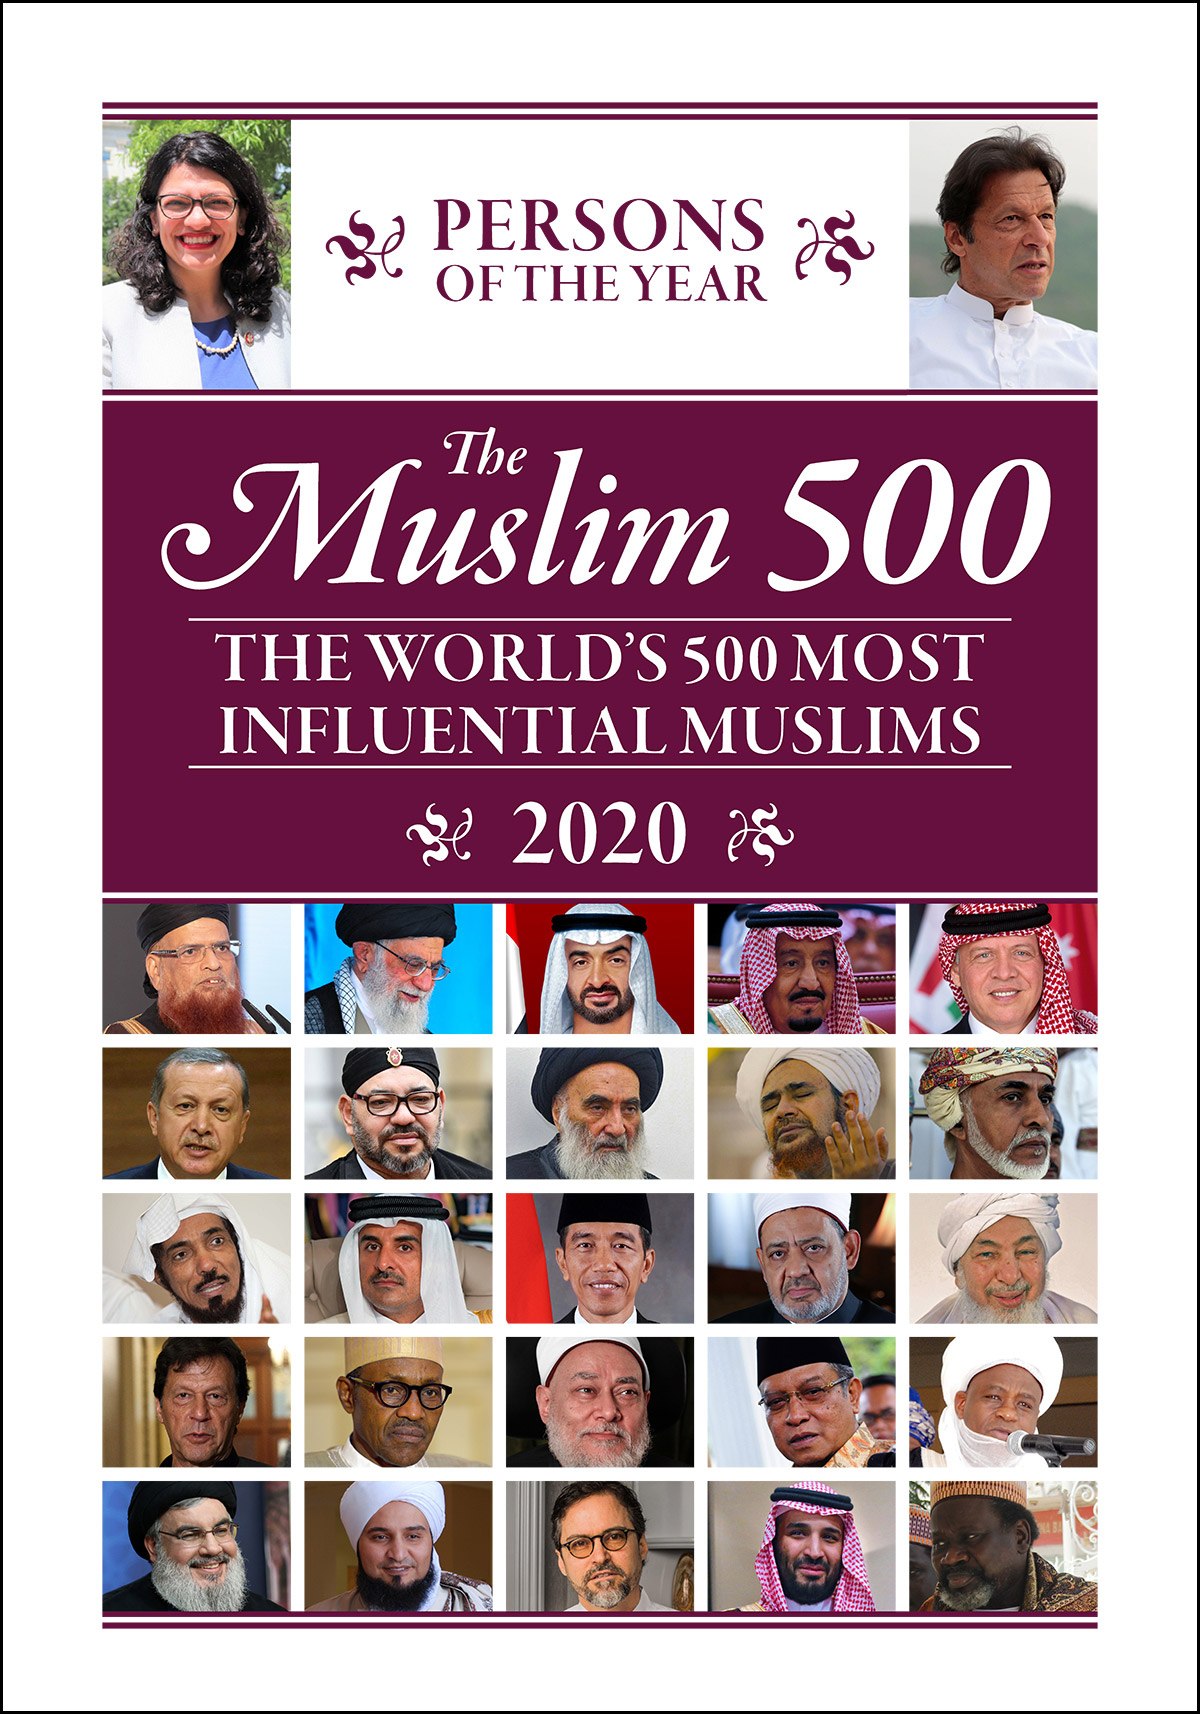 Listed in The Top 70 in 'The 500 Most Influential Muslims' – 2011 to 2020